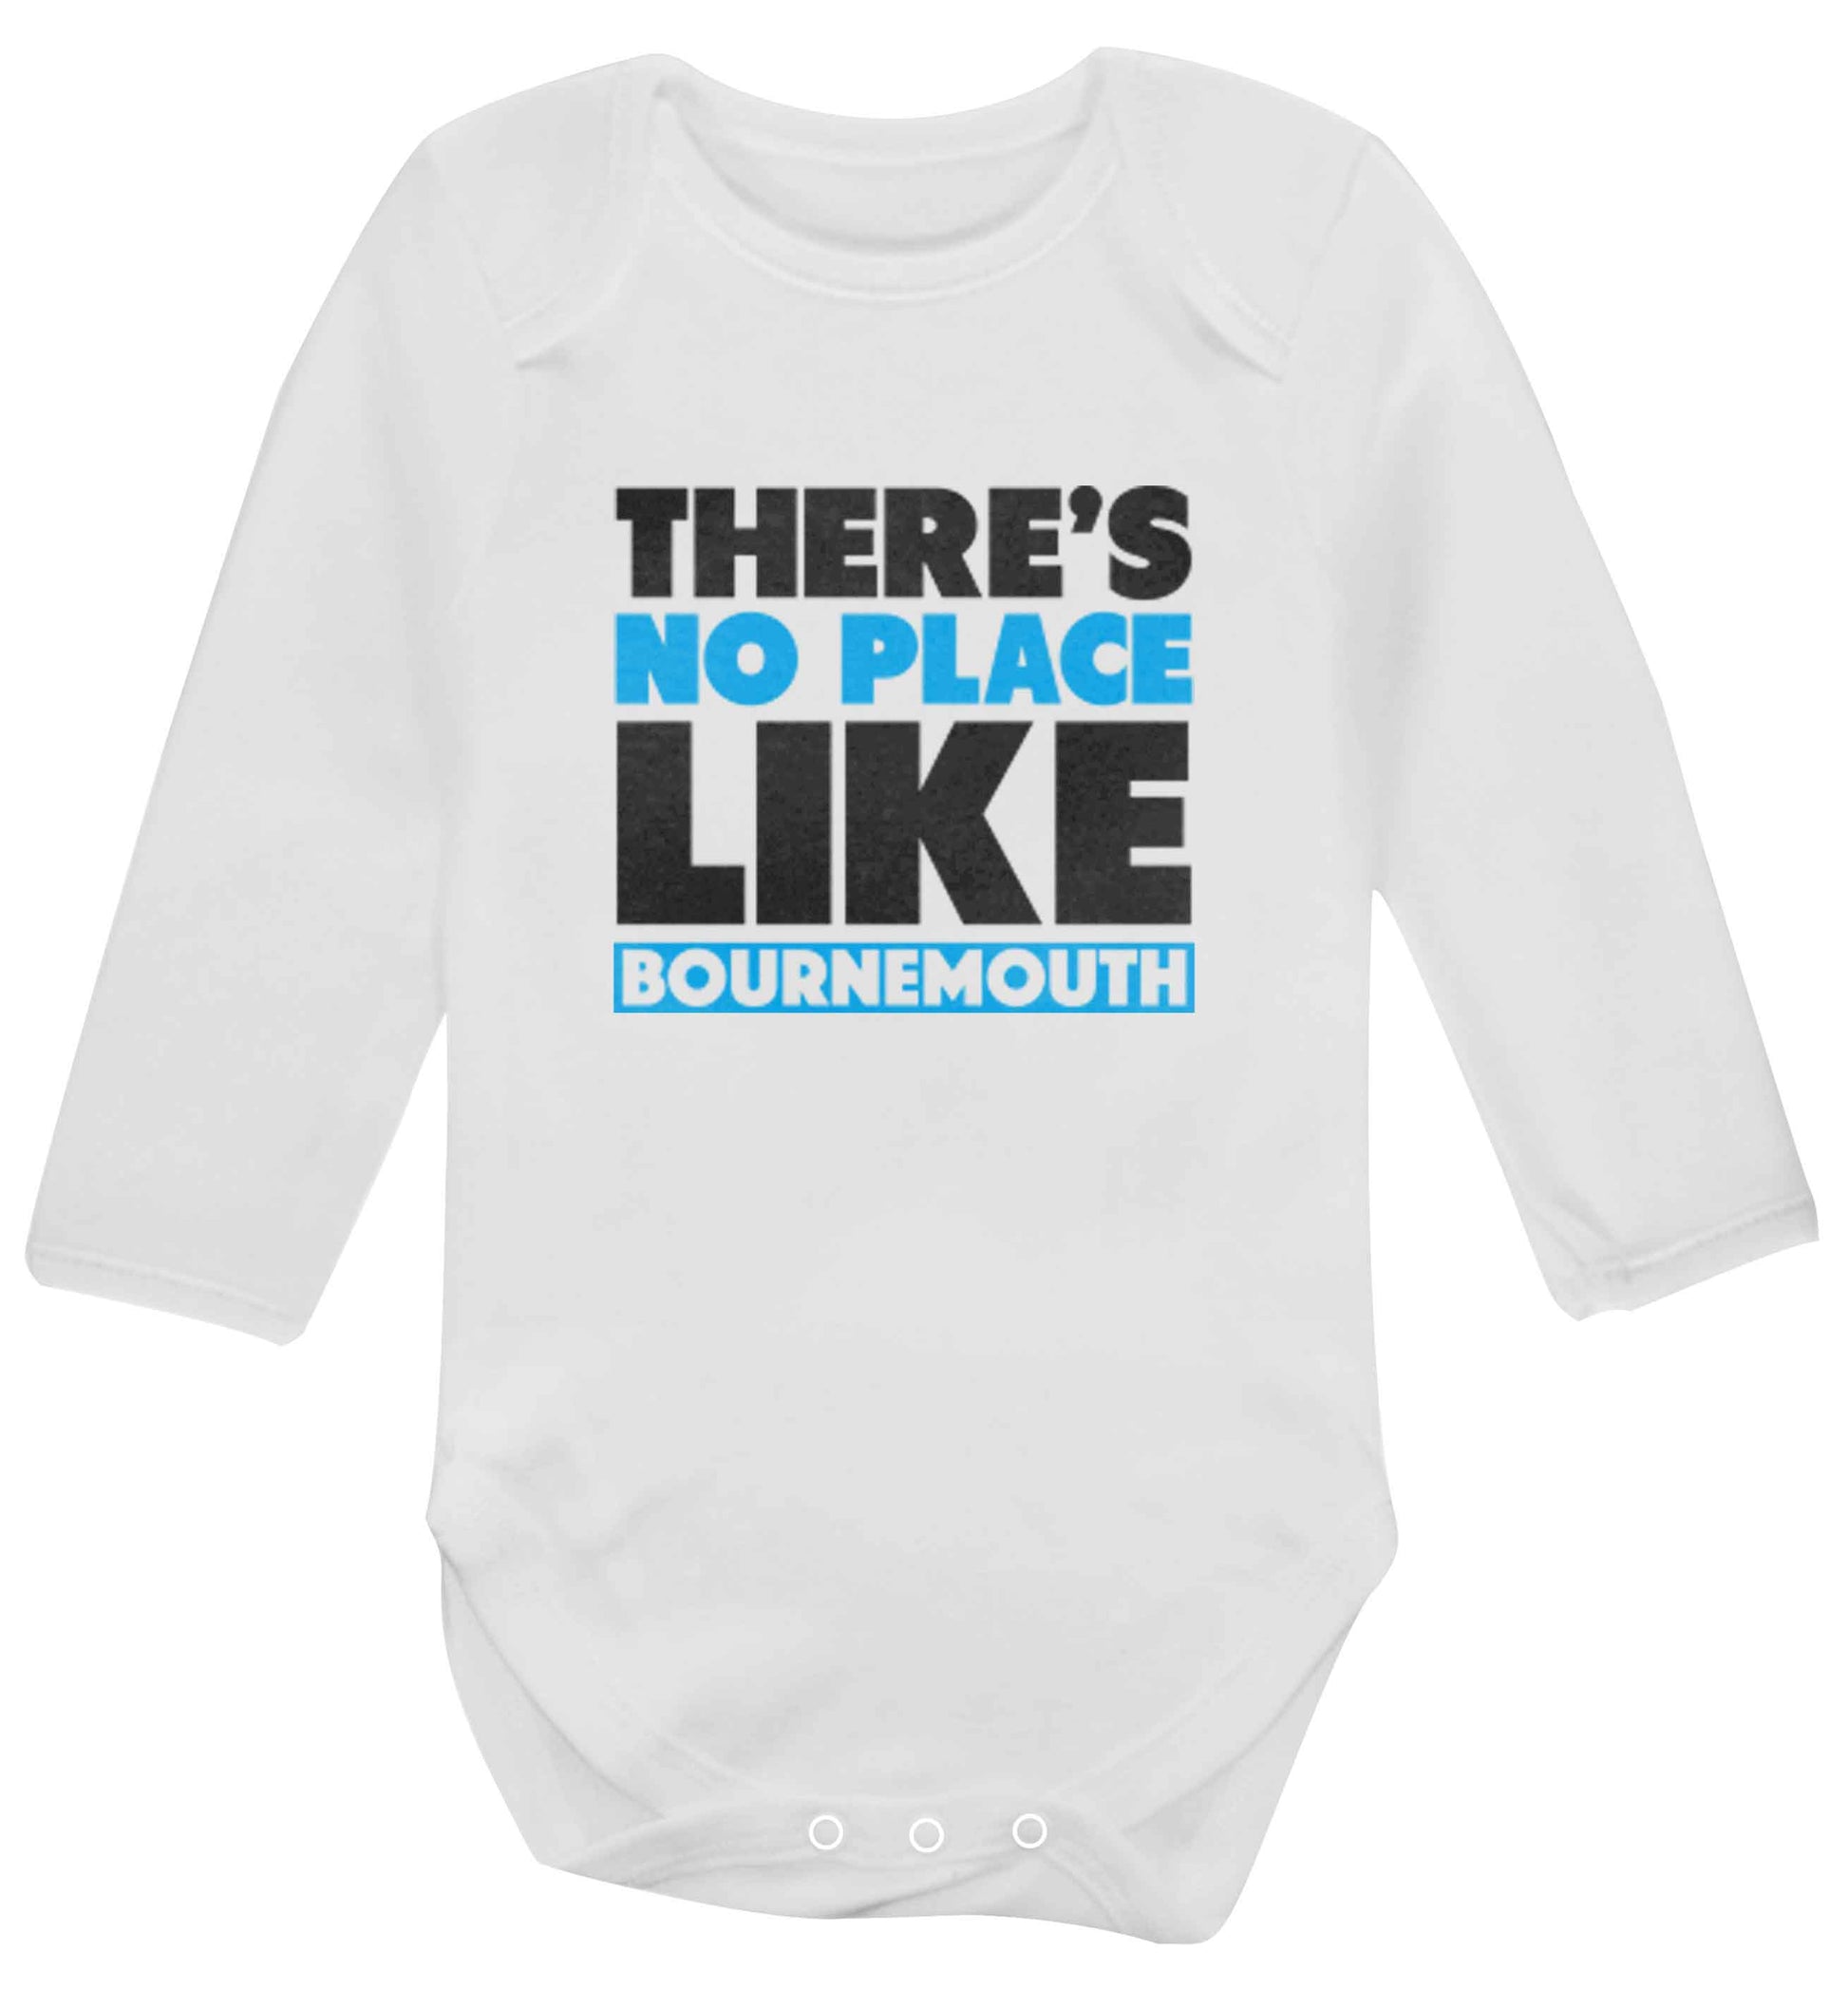 There's no place like Bournemouth baby vest long sleeved white 6-12 months